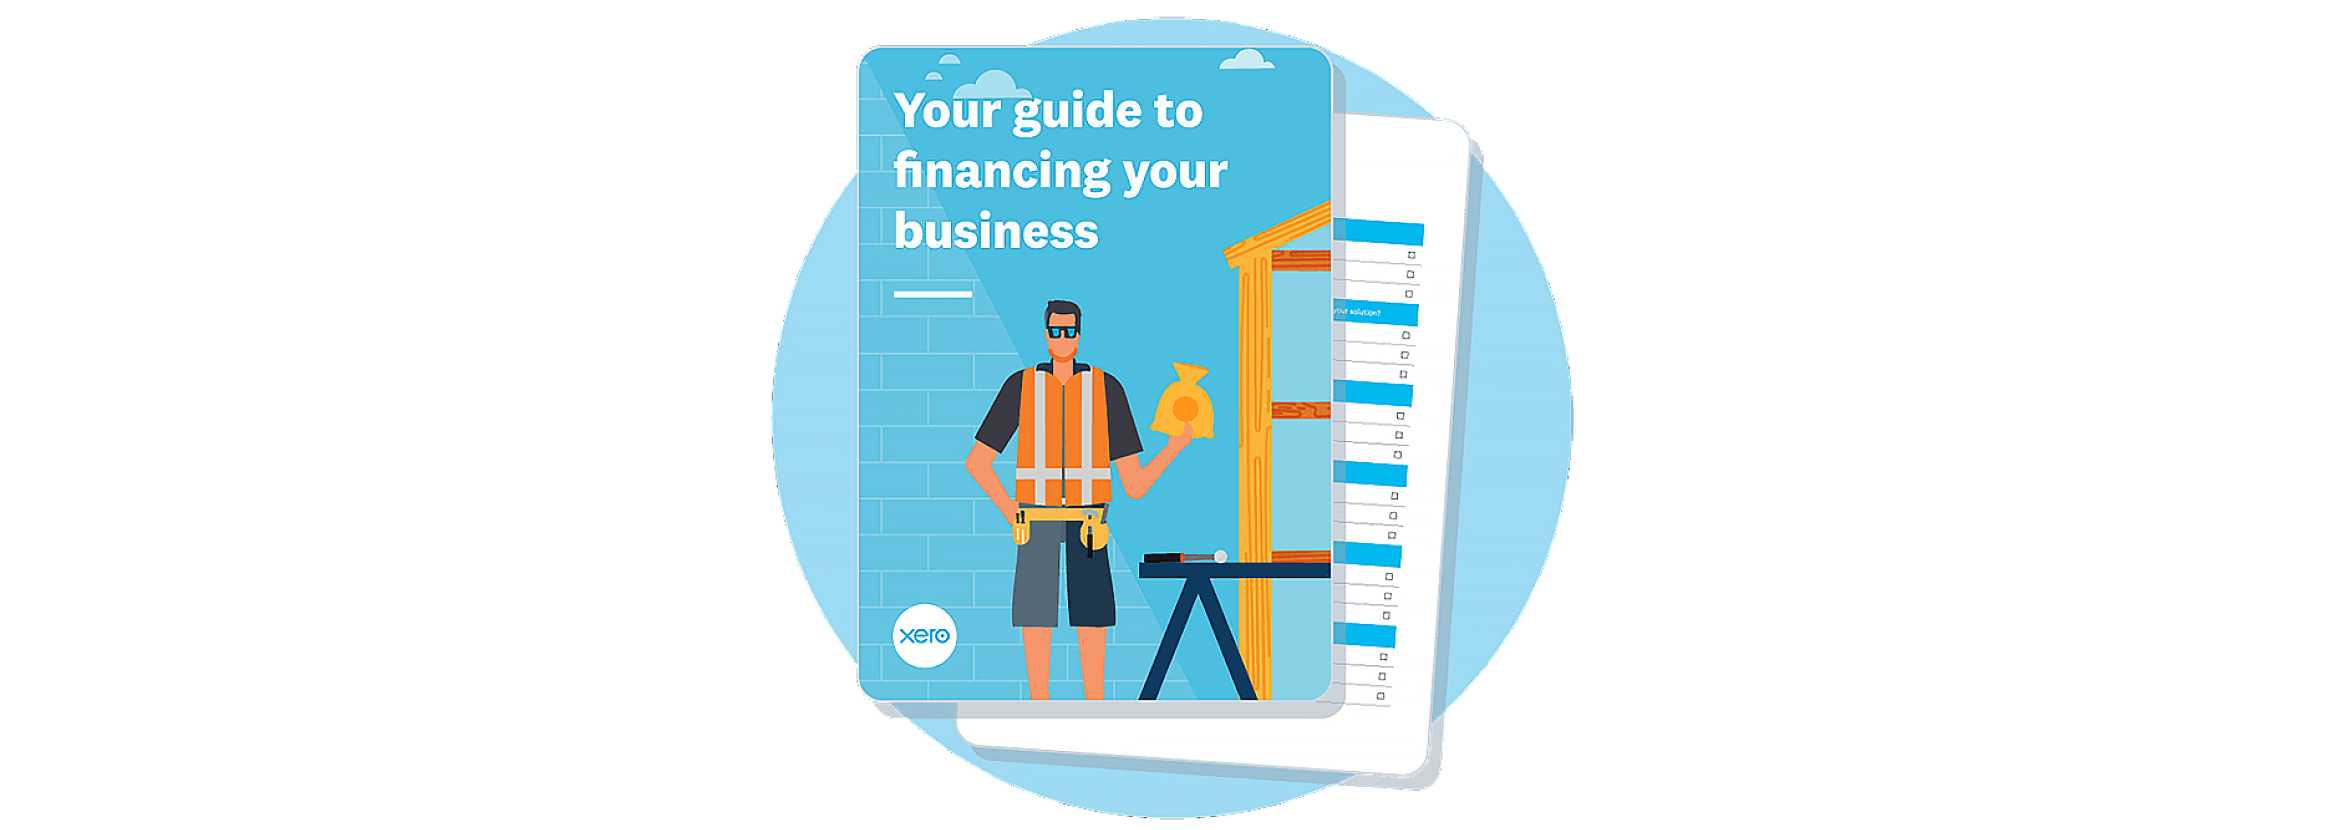 The cover of Xero’s guide to financing your own business.